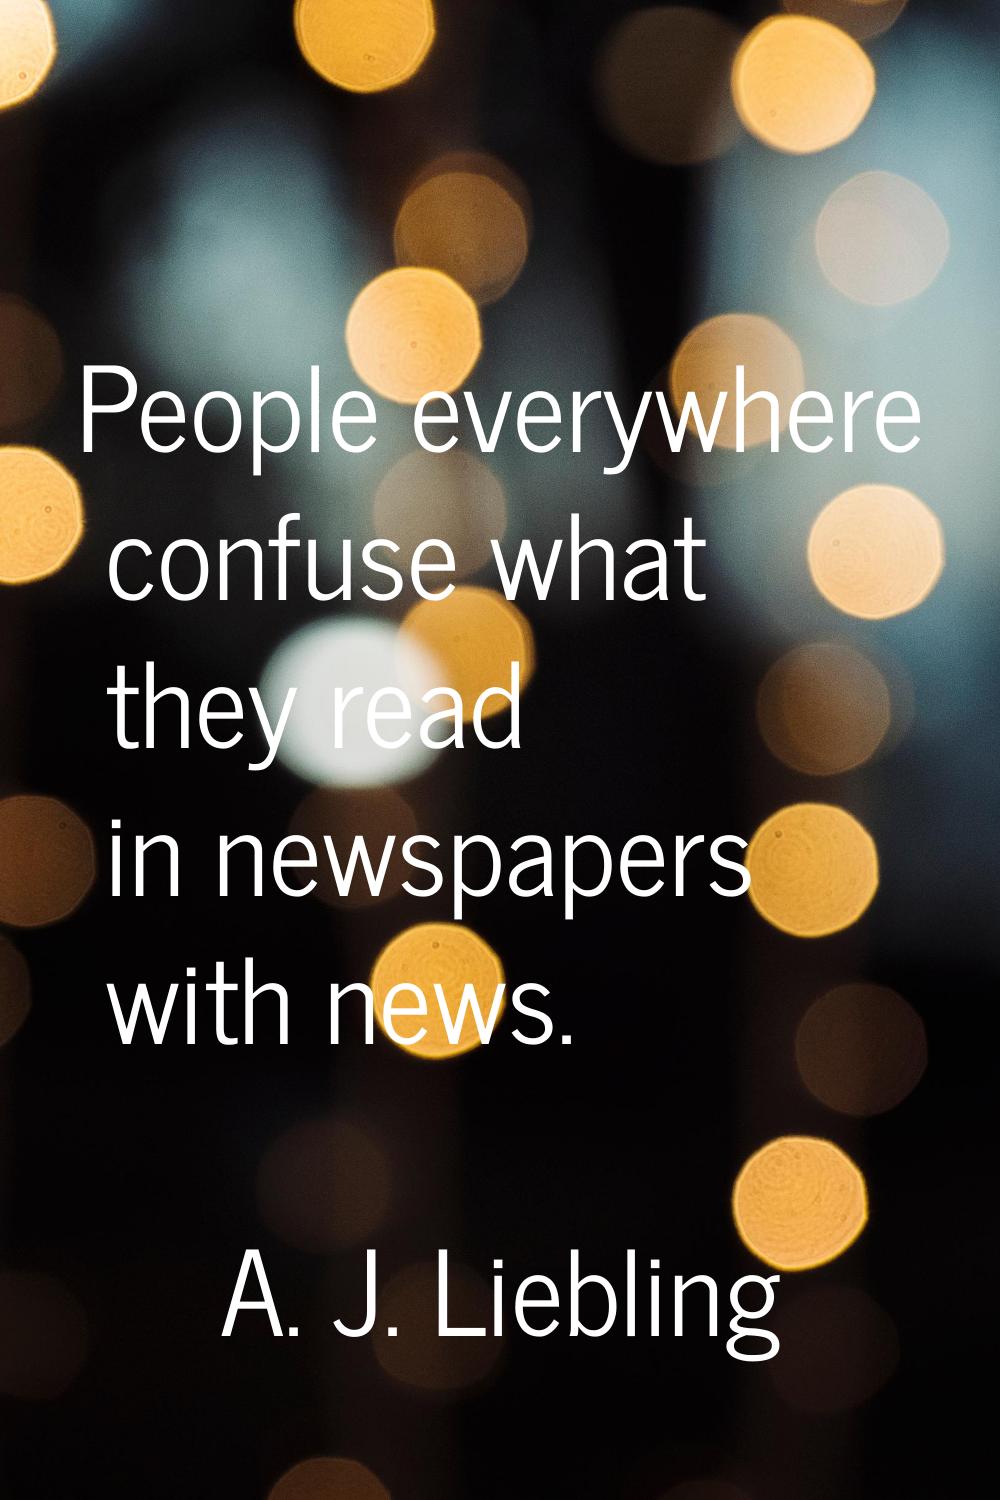 People everywhere confuse what they read in newspapers with news.